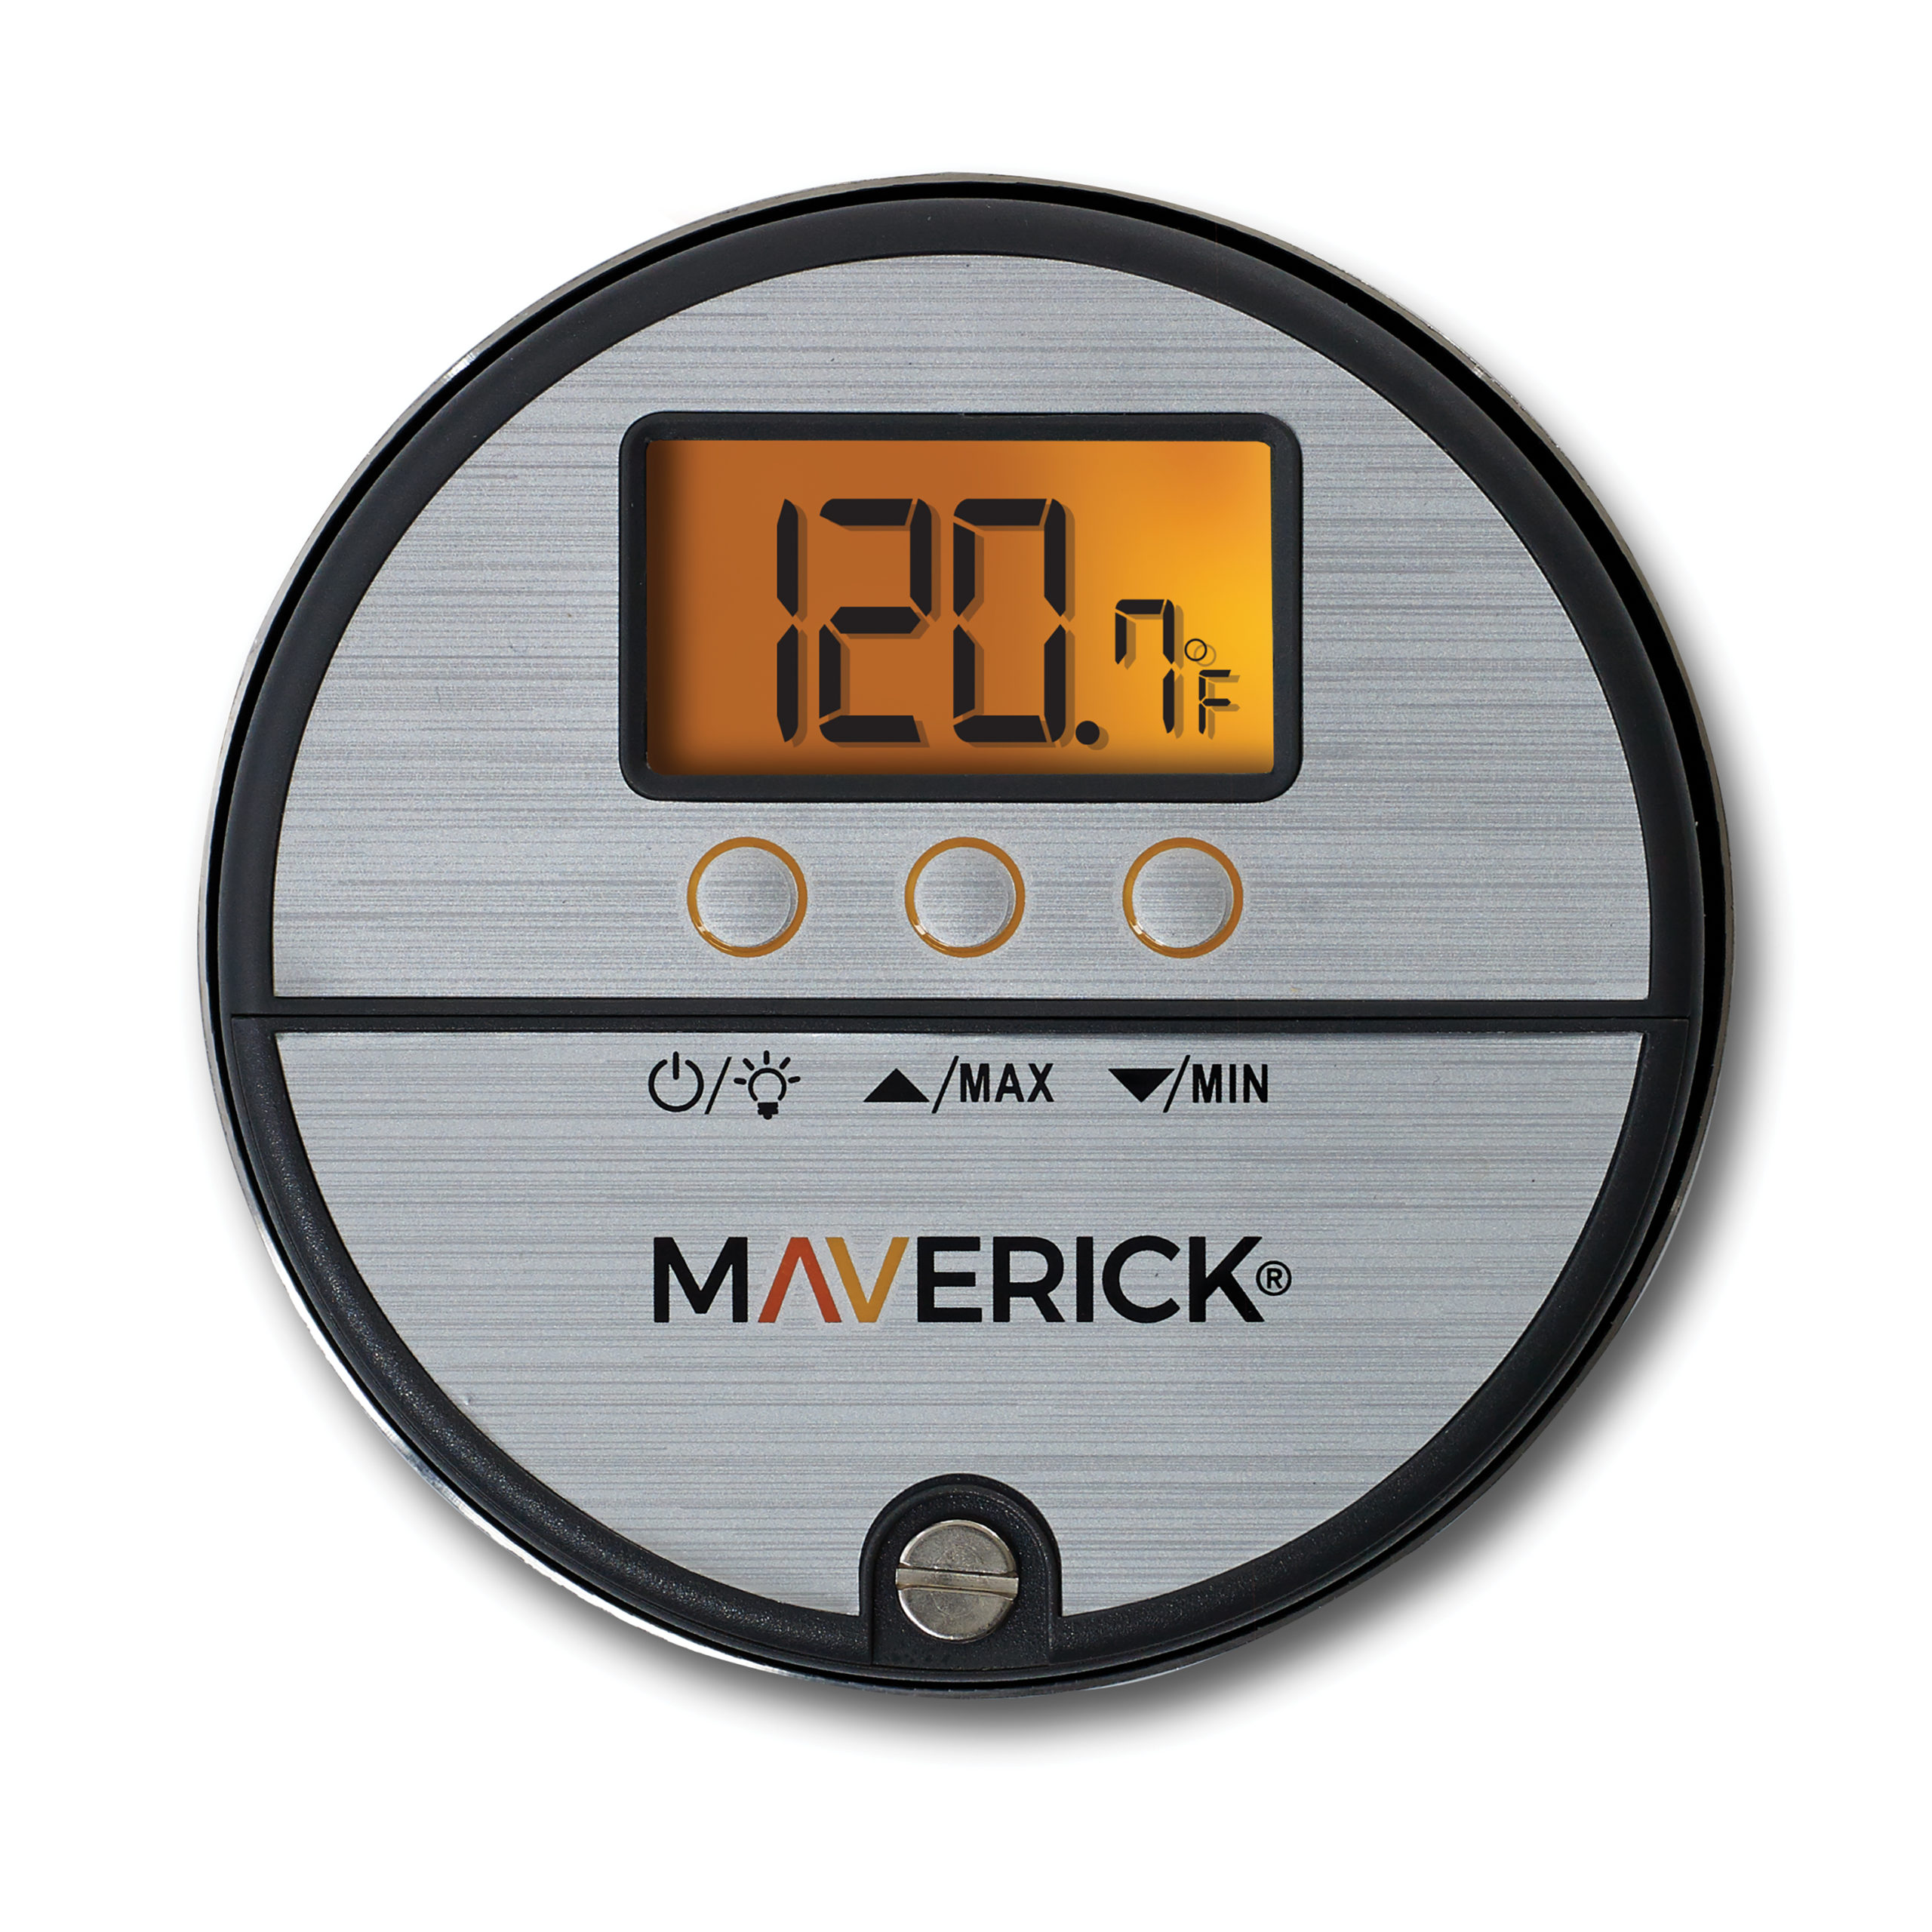 https://www.maverickthermometers.com/wp-content/uploads/2020/09/DGT_160_face-scaled.jpg